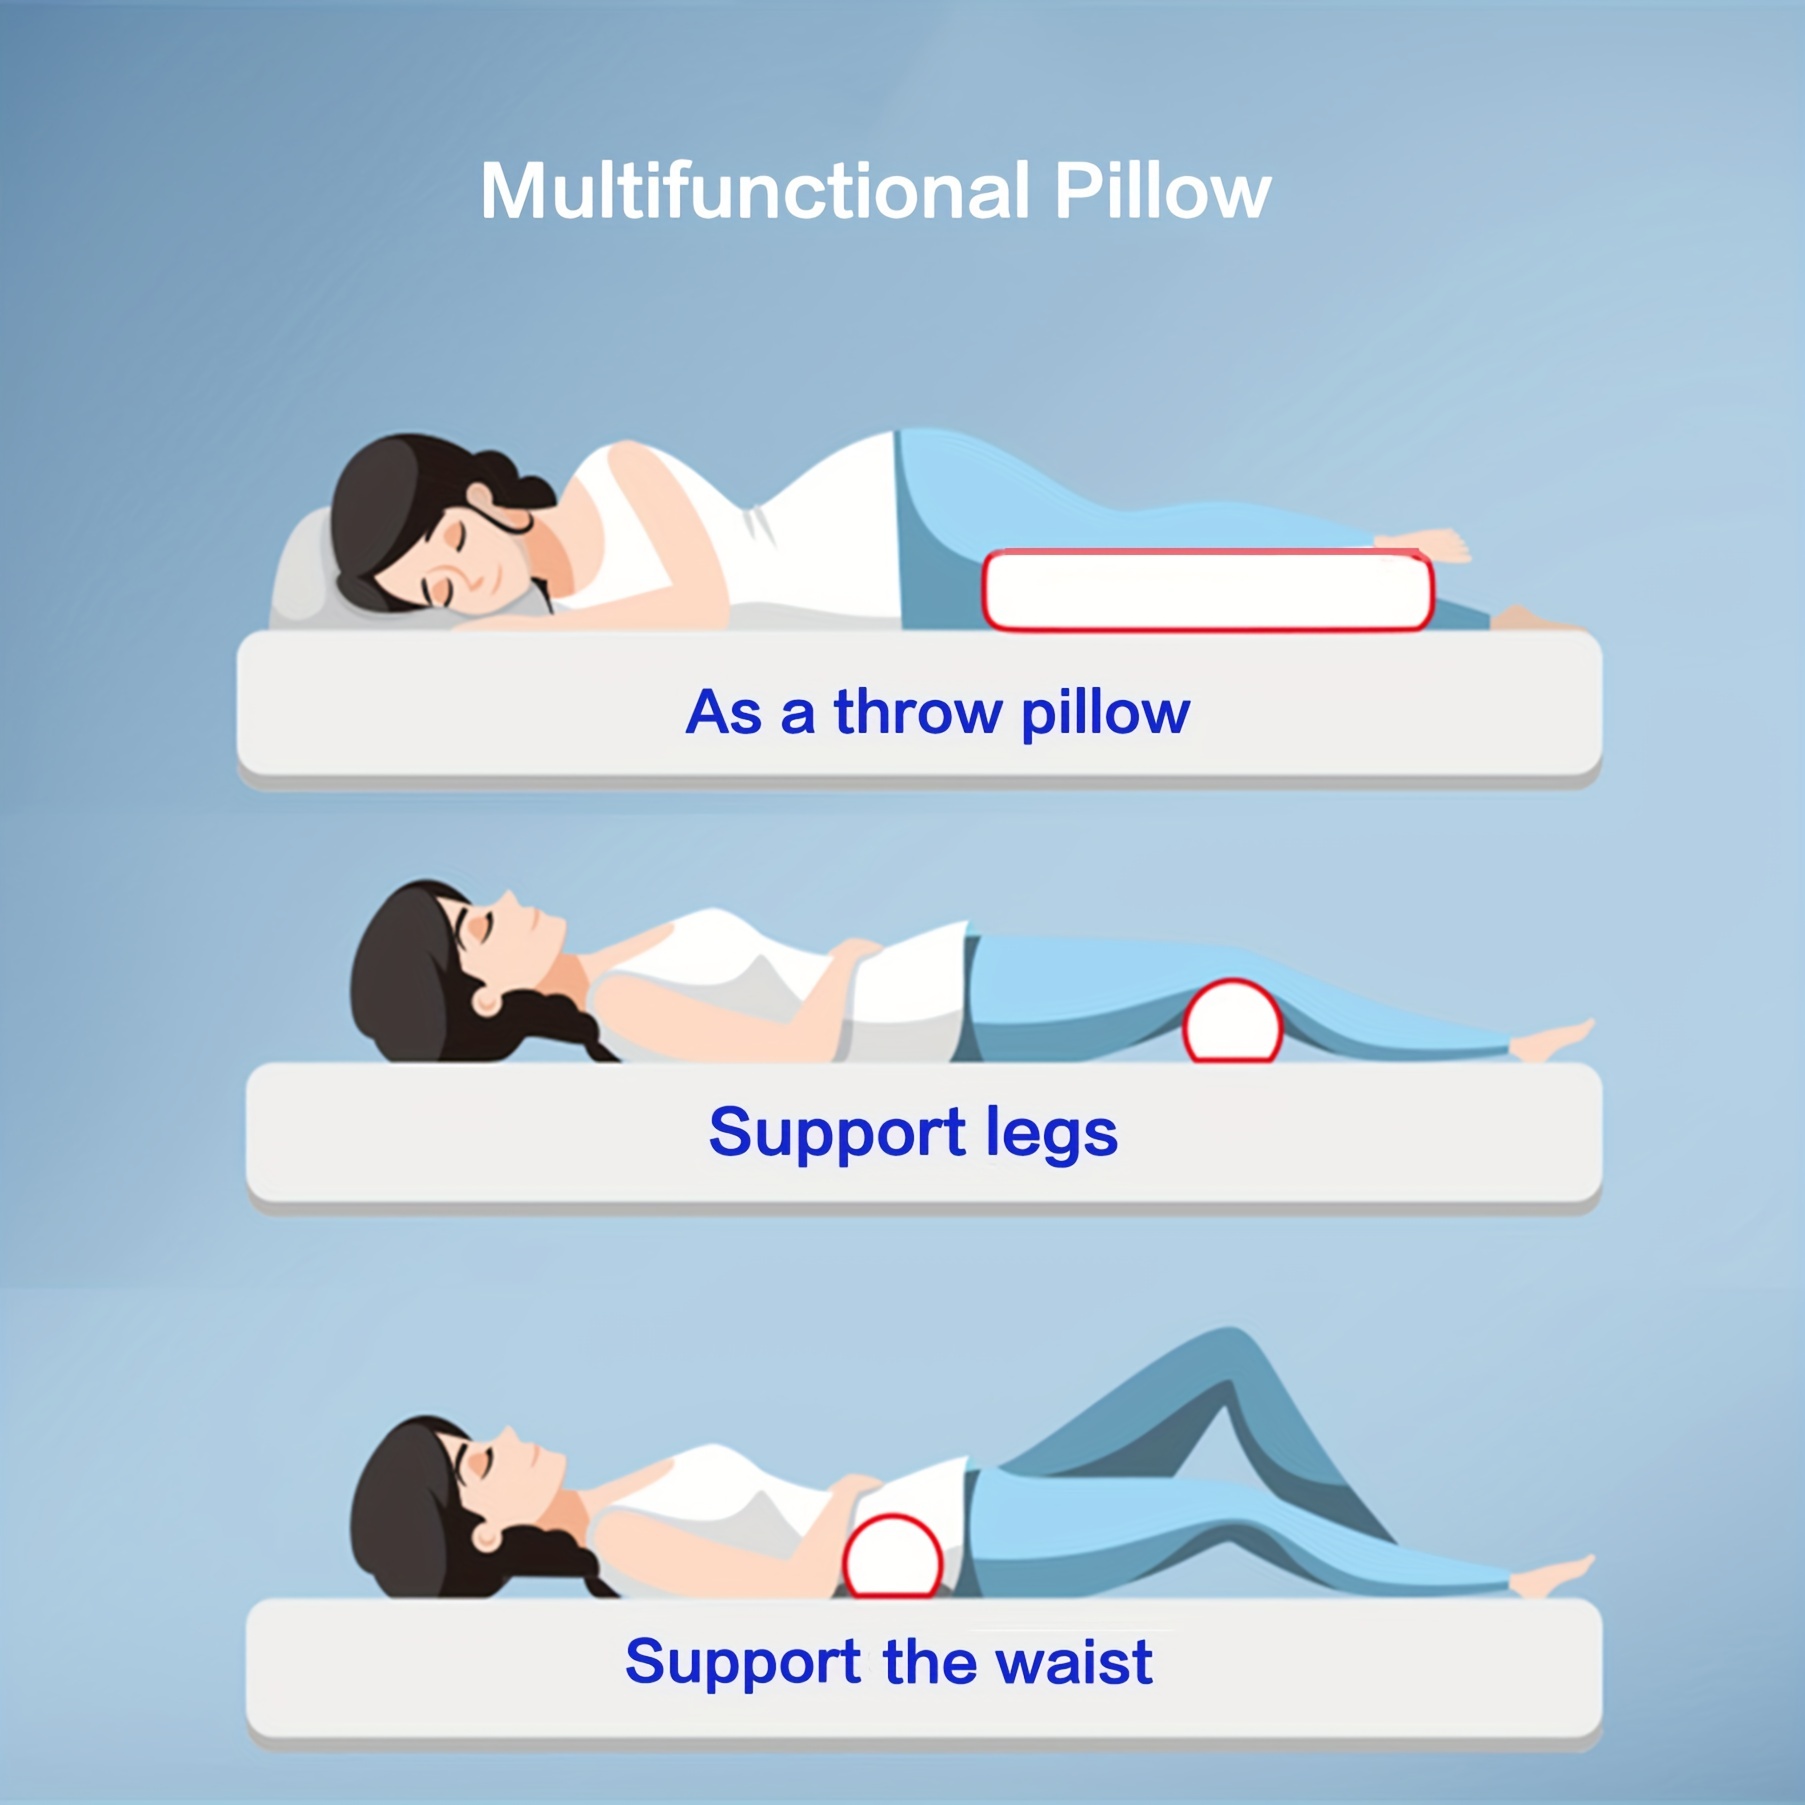 Back Support: 4 Benefits of Using a Memory Foam Back Pillow